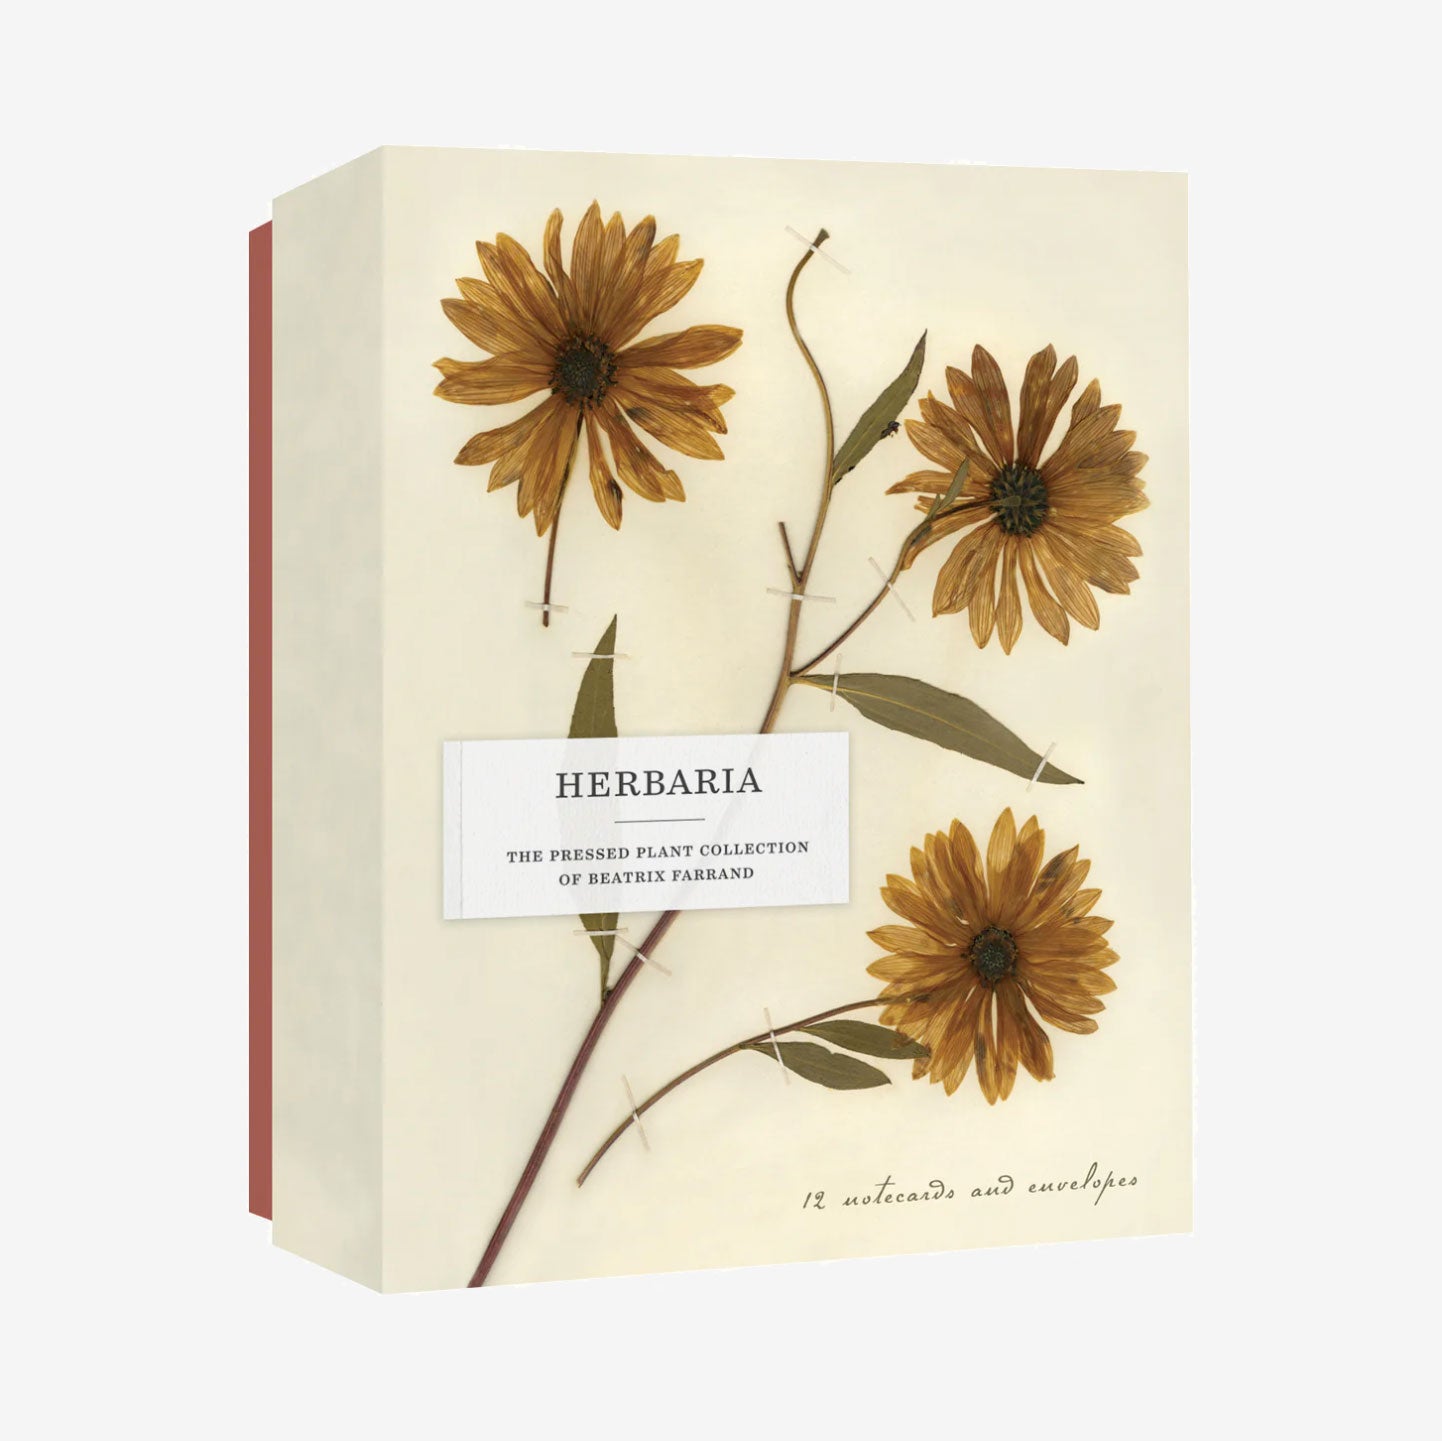 Herbaria: The Pressed Plant Collection of Beatrix Farrand Notecards